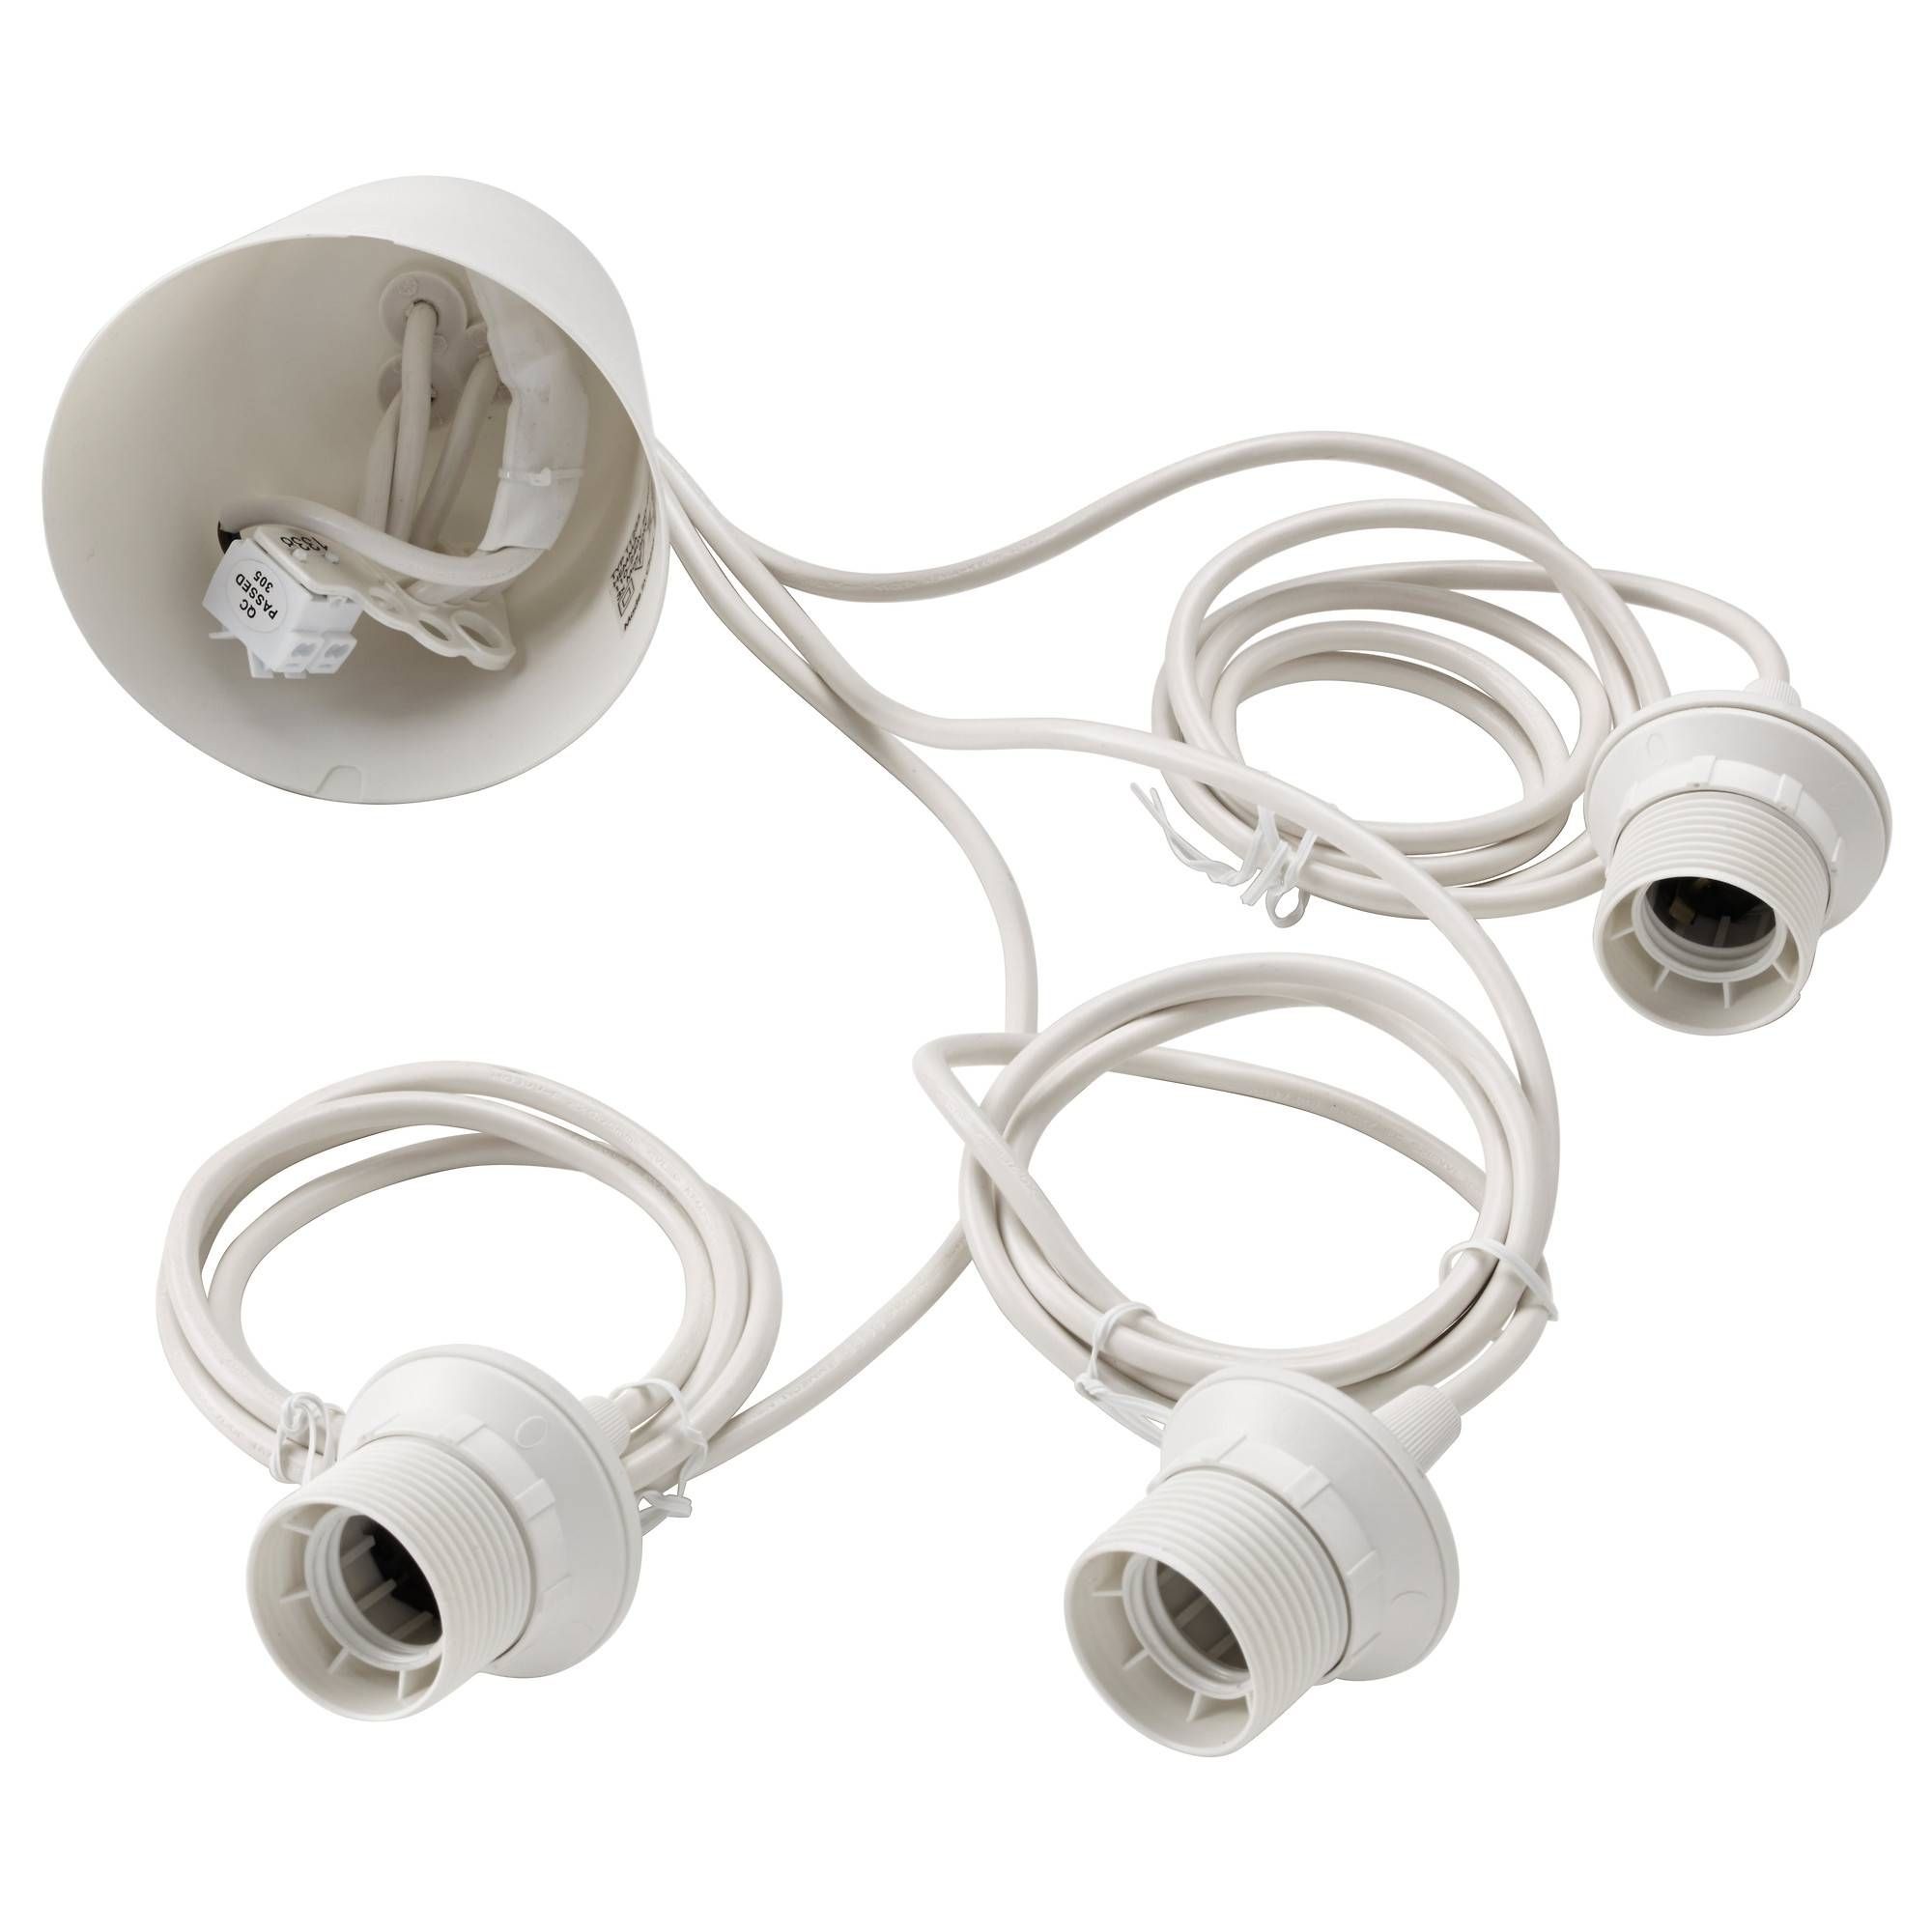 Hemma Triple Pendant Cord Set – Ikea Intended For Cord Sets For Pendant Lights (View 5 of 15)